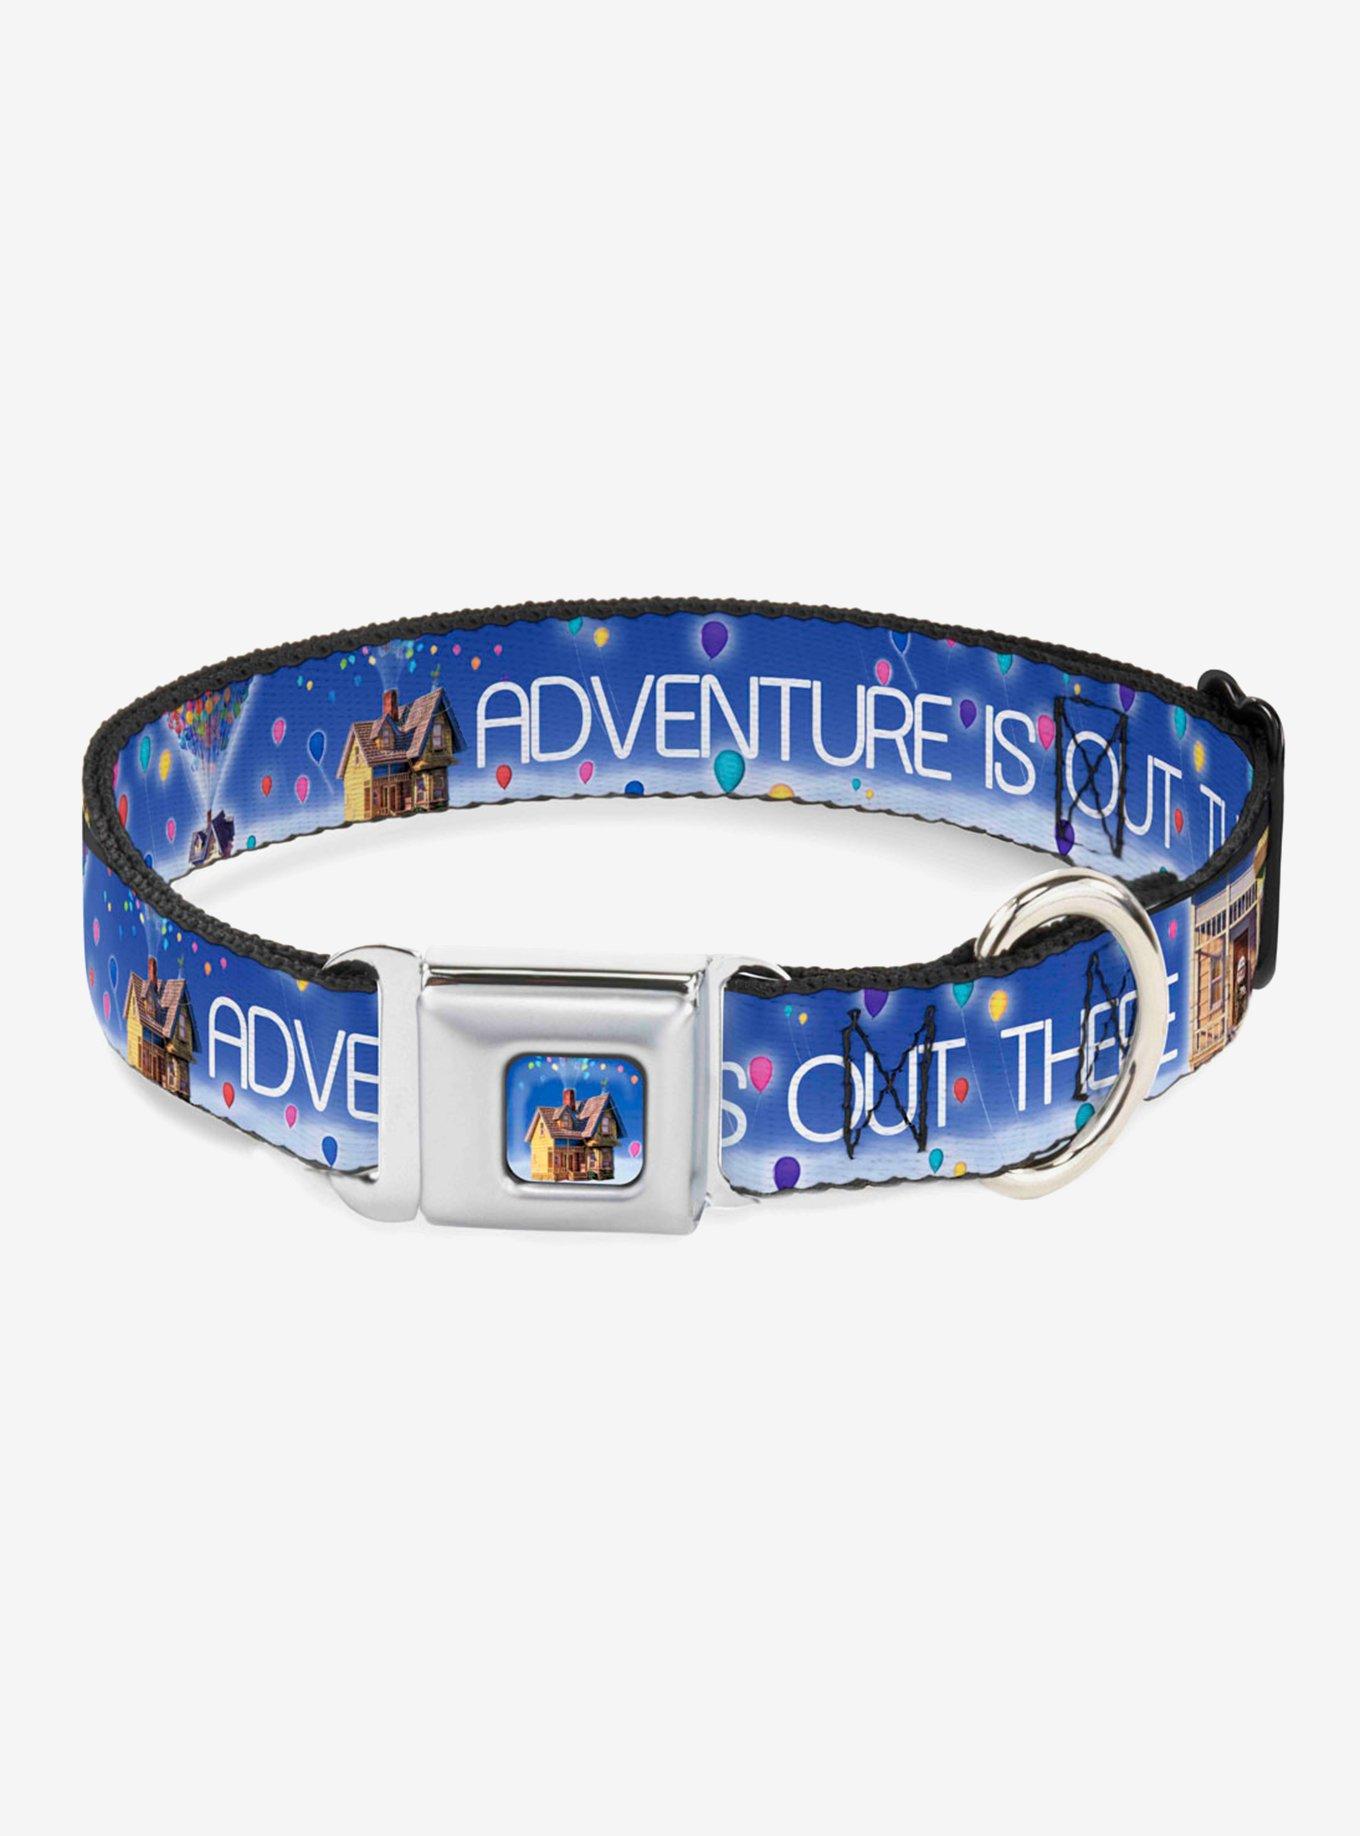 Disney Pixar Up Adventure Is Out There Carl on Porch House Balloons Dog Collar Seatbelt Buckle, MULTI COLOR, hi-res